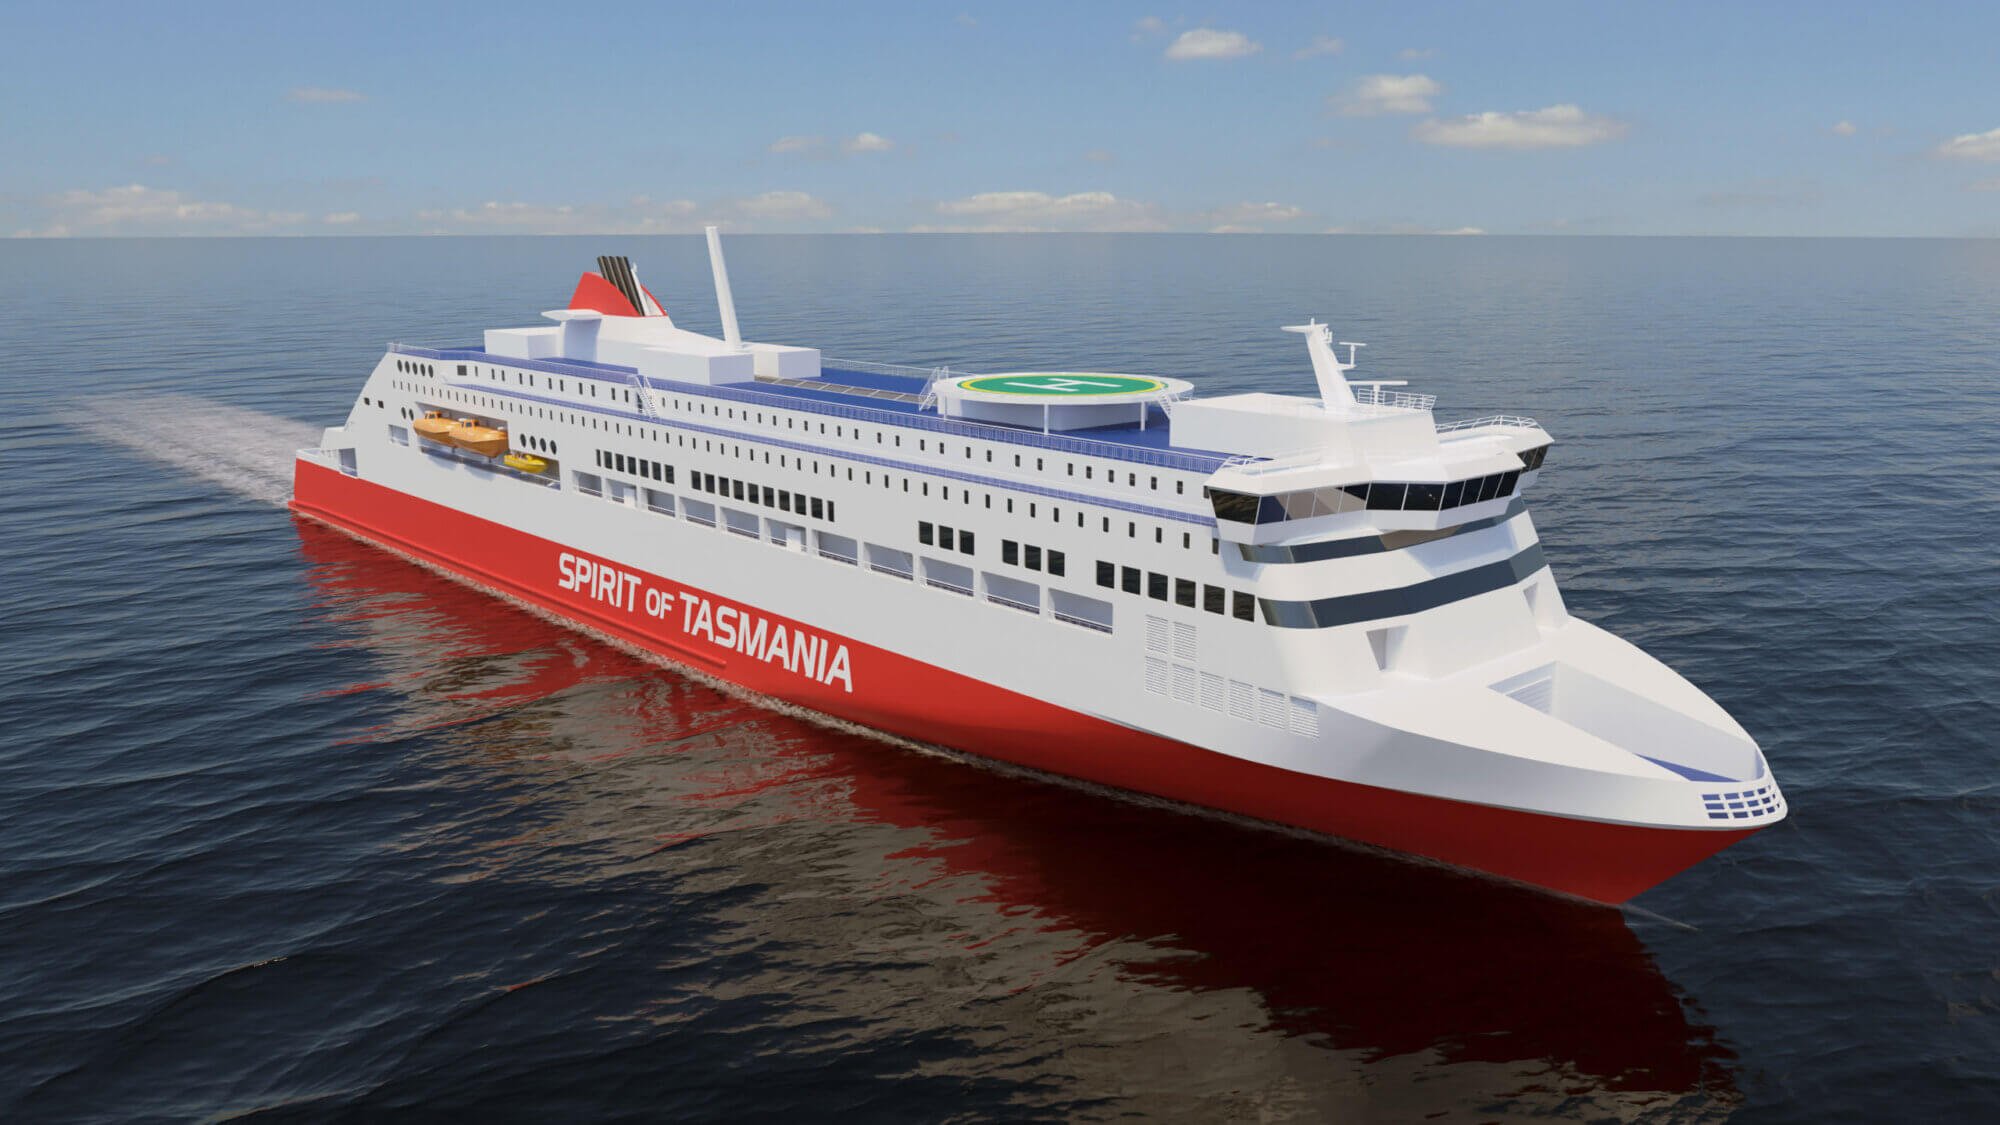 Contract for two new car and passenger ferries for TT-Line strengthens RMC's order book significantly